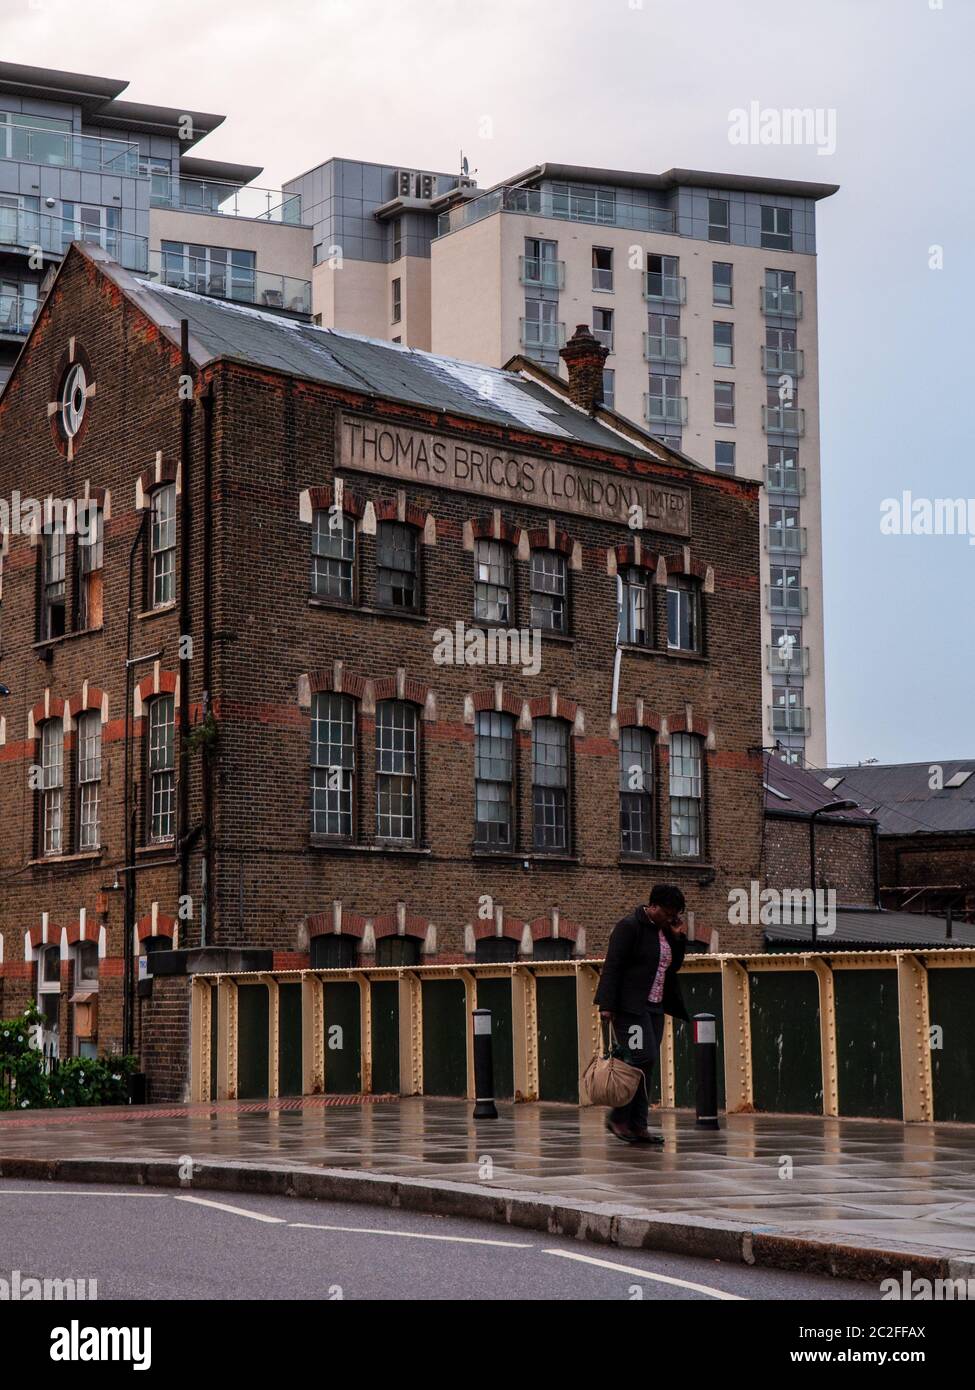 London, England, UK - July 13, 2010: An old warehouse building and modern apartment buildings are juxtaposed on Southgate Road in Hackney, North Londo Stock Photo